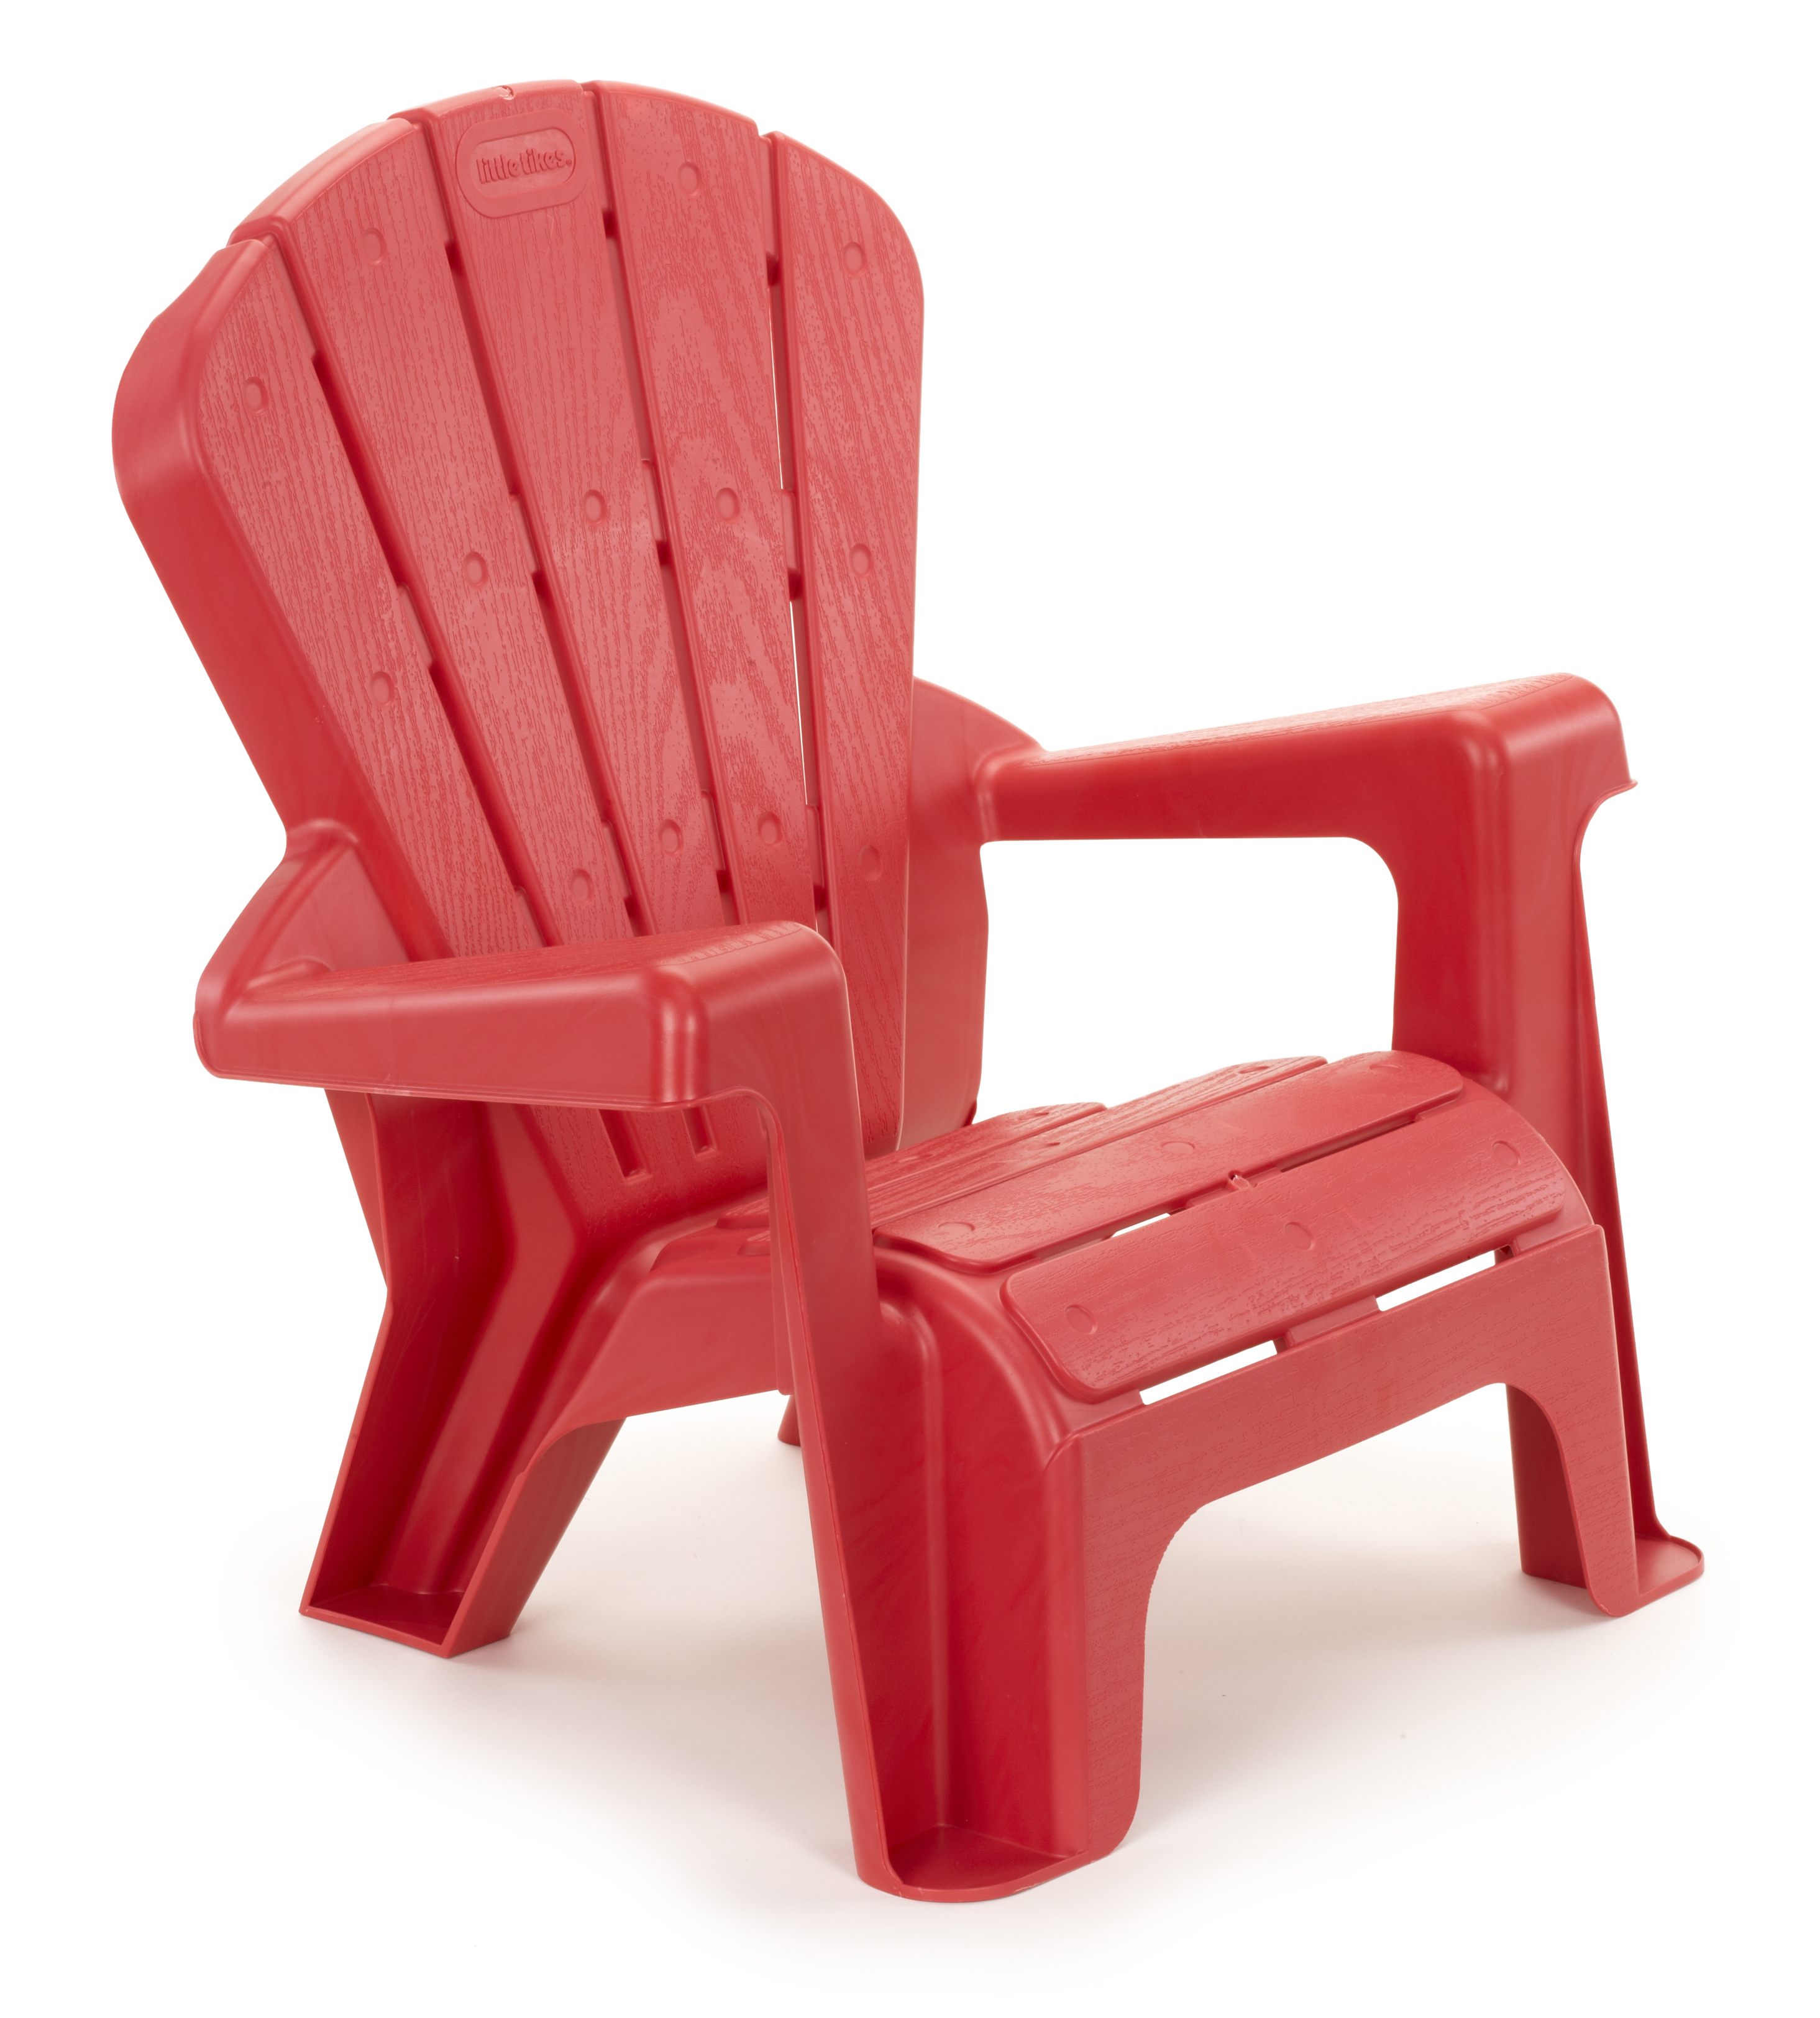 Little Tikes Kids Garden Chair, Kids Furniture For Activity Playroom and Patio, Fits Toddlers and Kids, Red - available in multiple colors - image 5 of 5